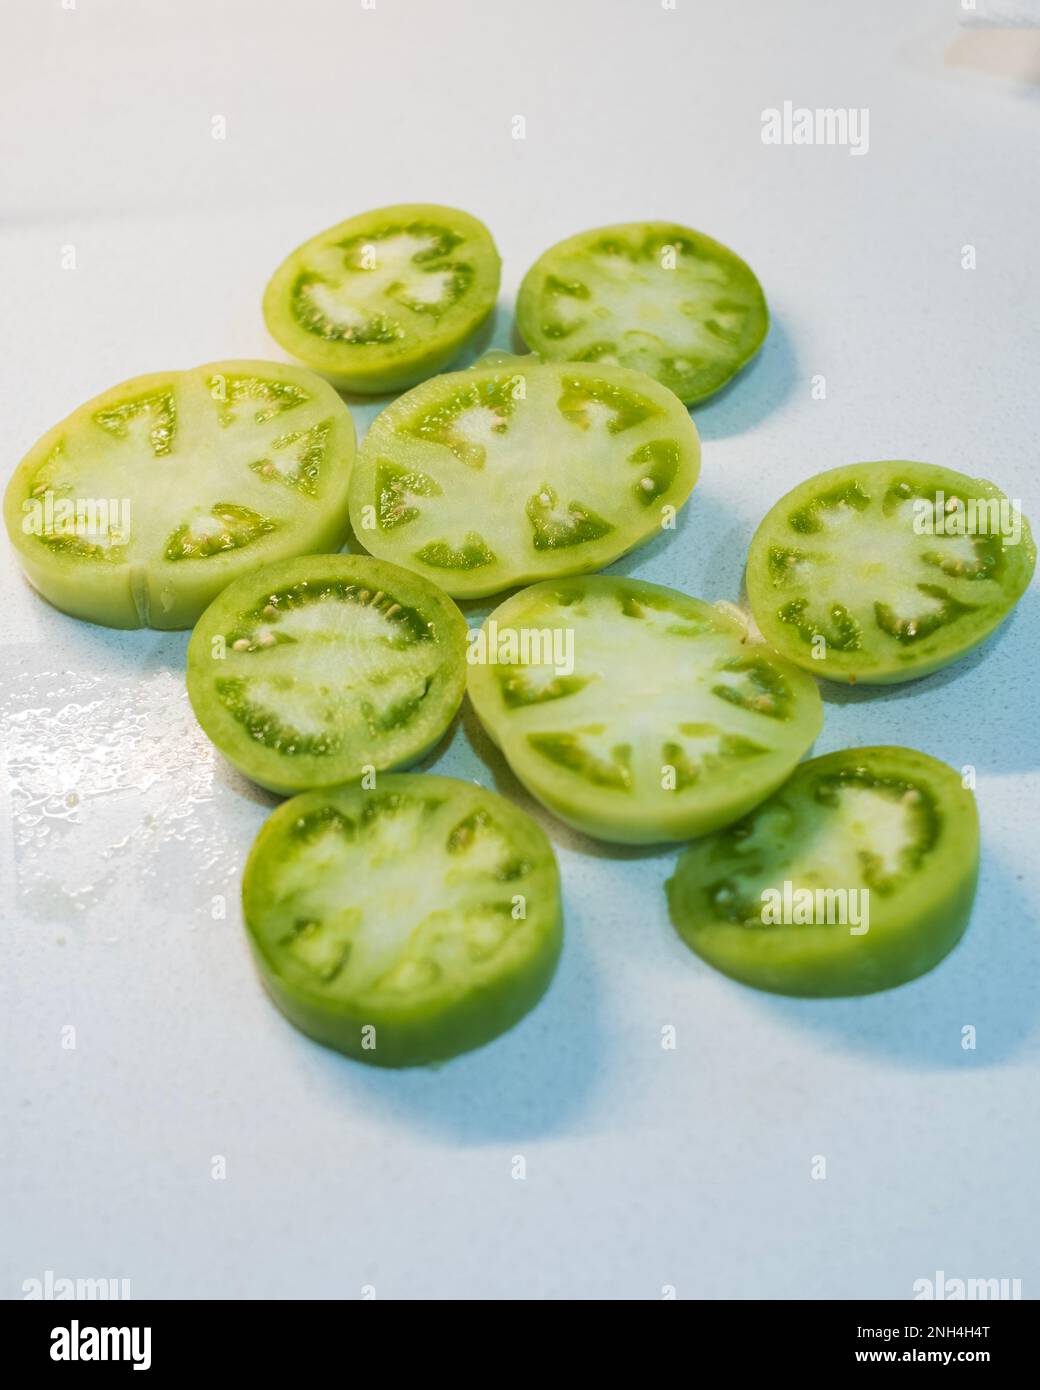 Sliced green tomatoes ready for breading and frying on a white background . Stock Photo